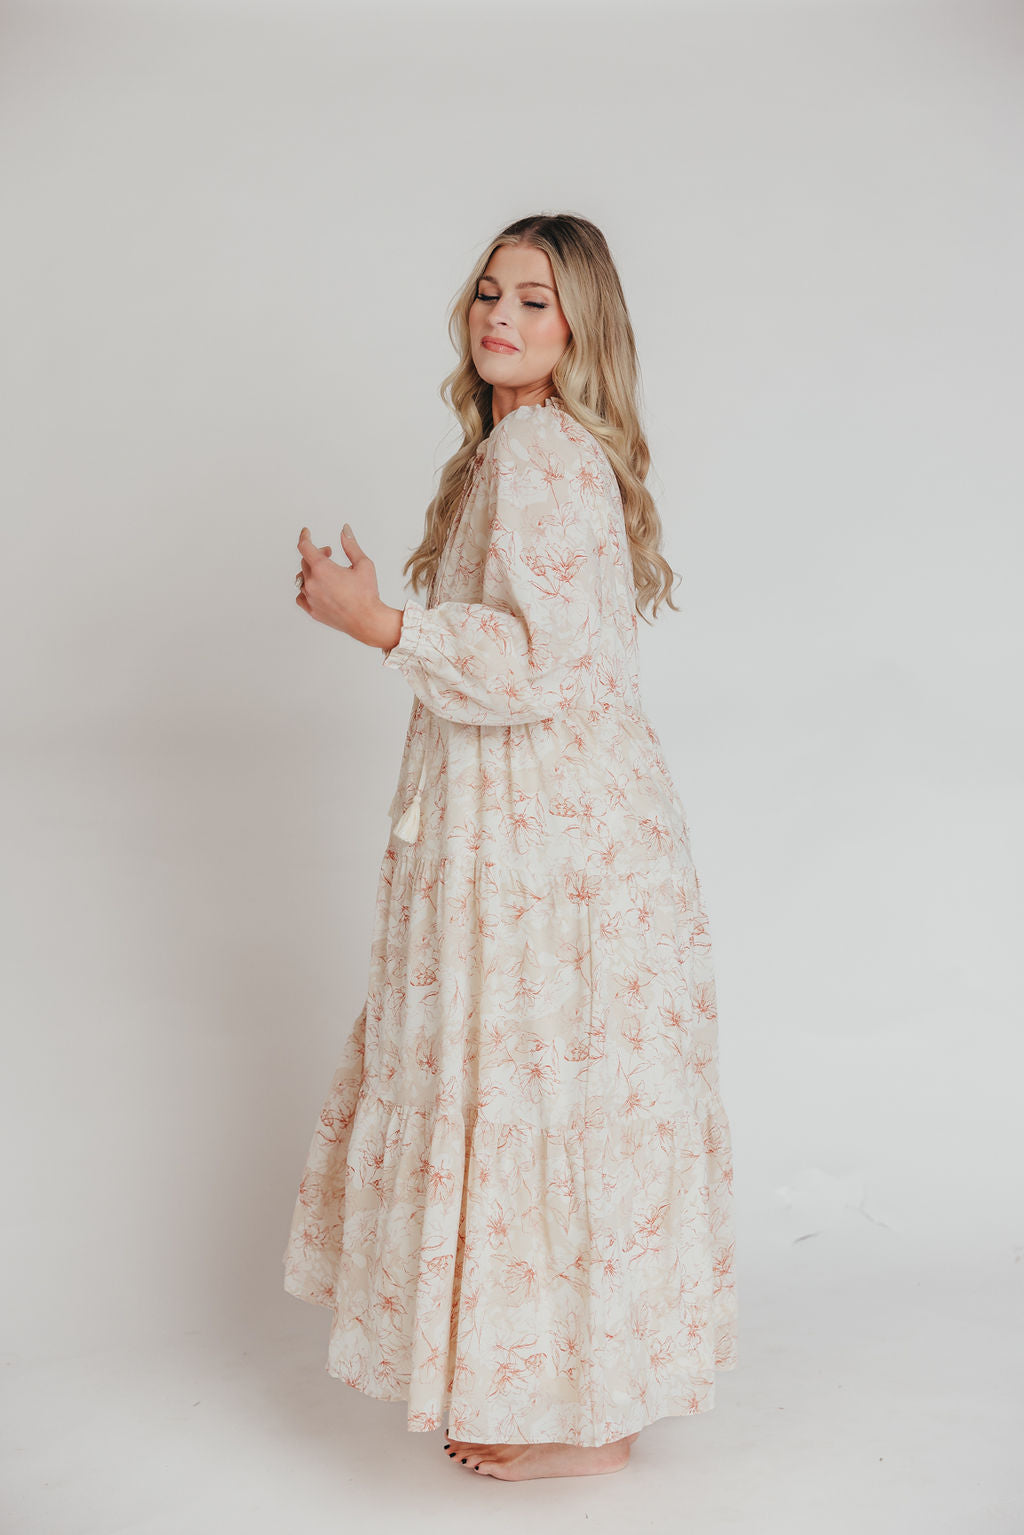 Mallory Long-Sleeved Maxi Dress with Tassel in Terracotta Floral - Bump Friendly - Inclusive Sizing (S-3XL)